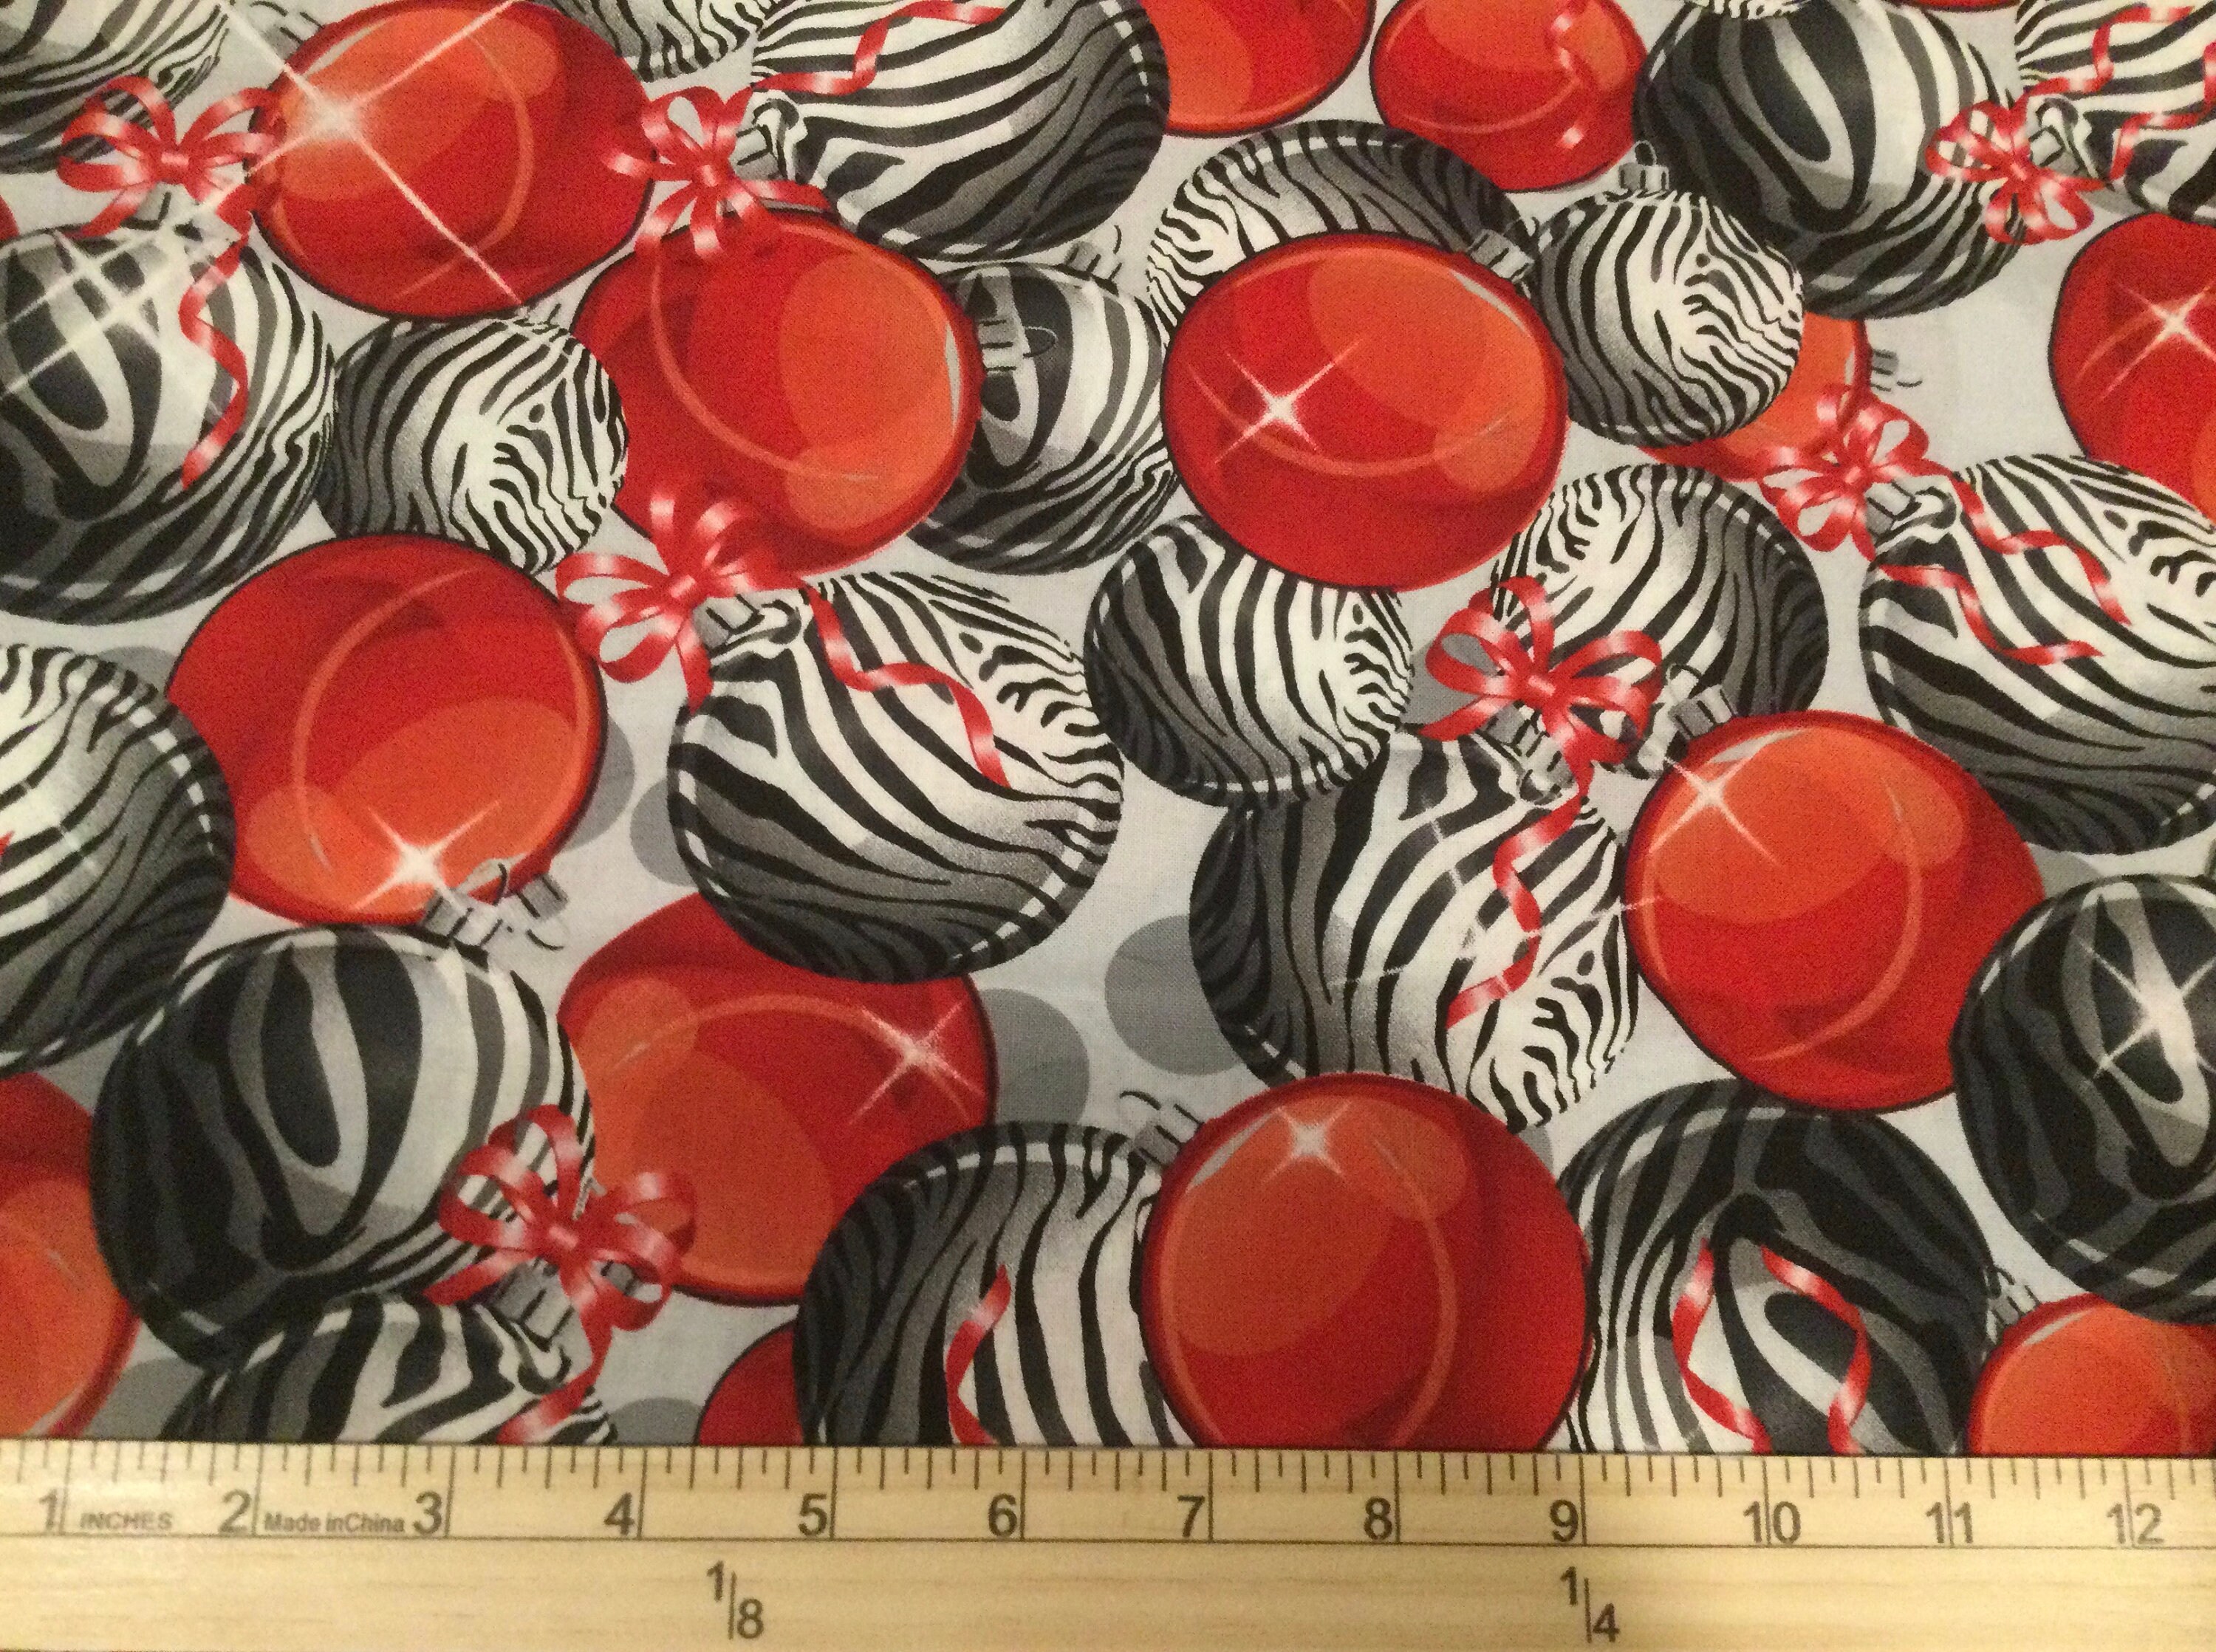 Cotton balls 3D fabric (black and red)